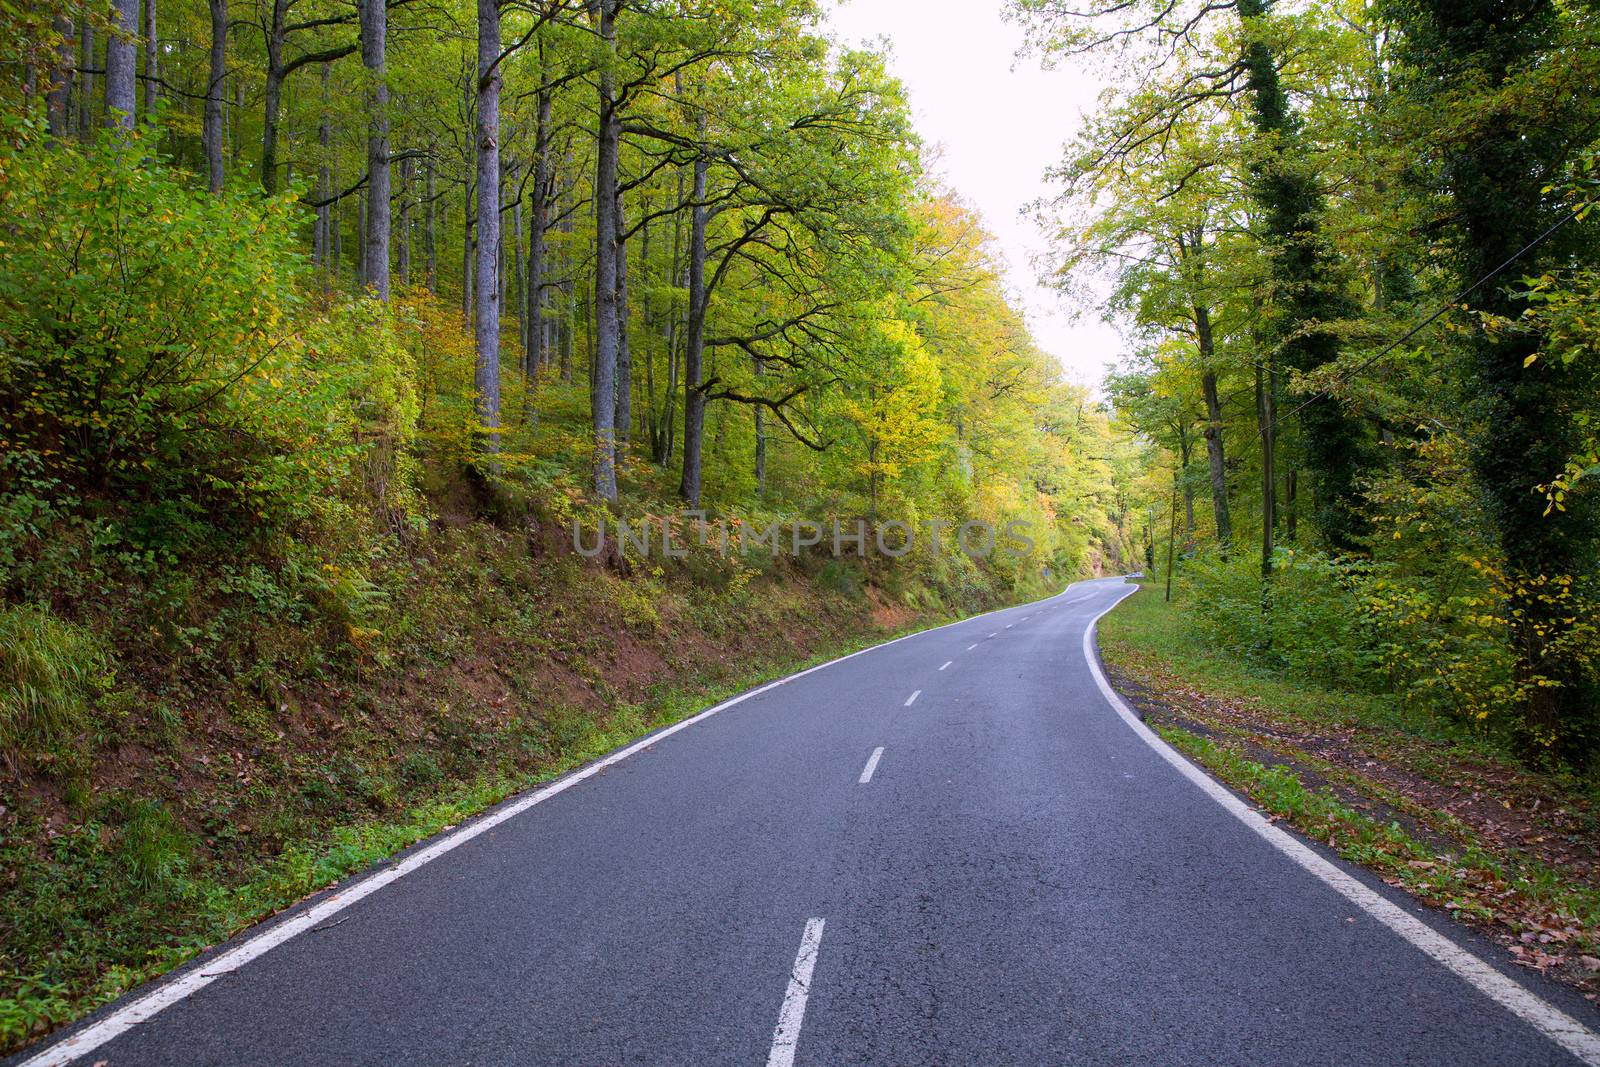 Pyrenees curve road in forest of Spain